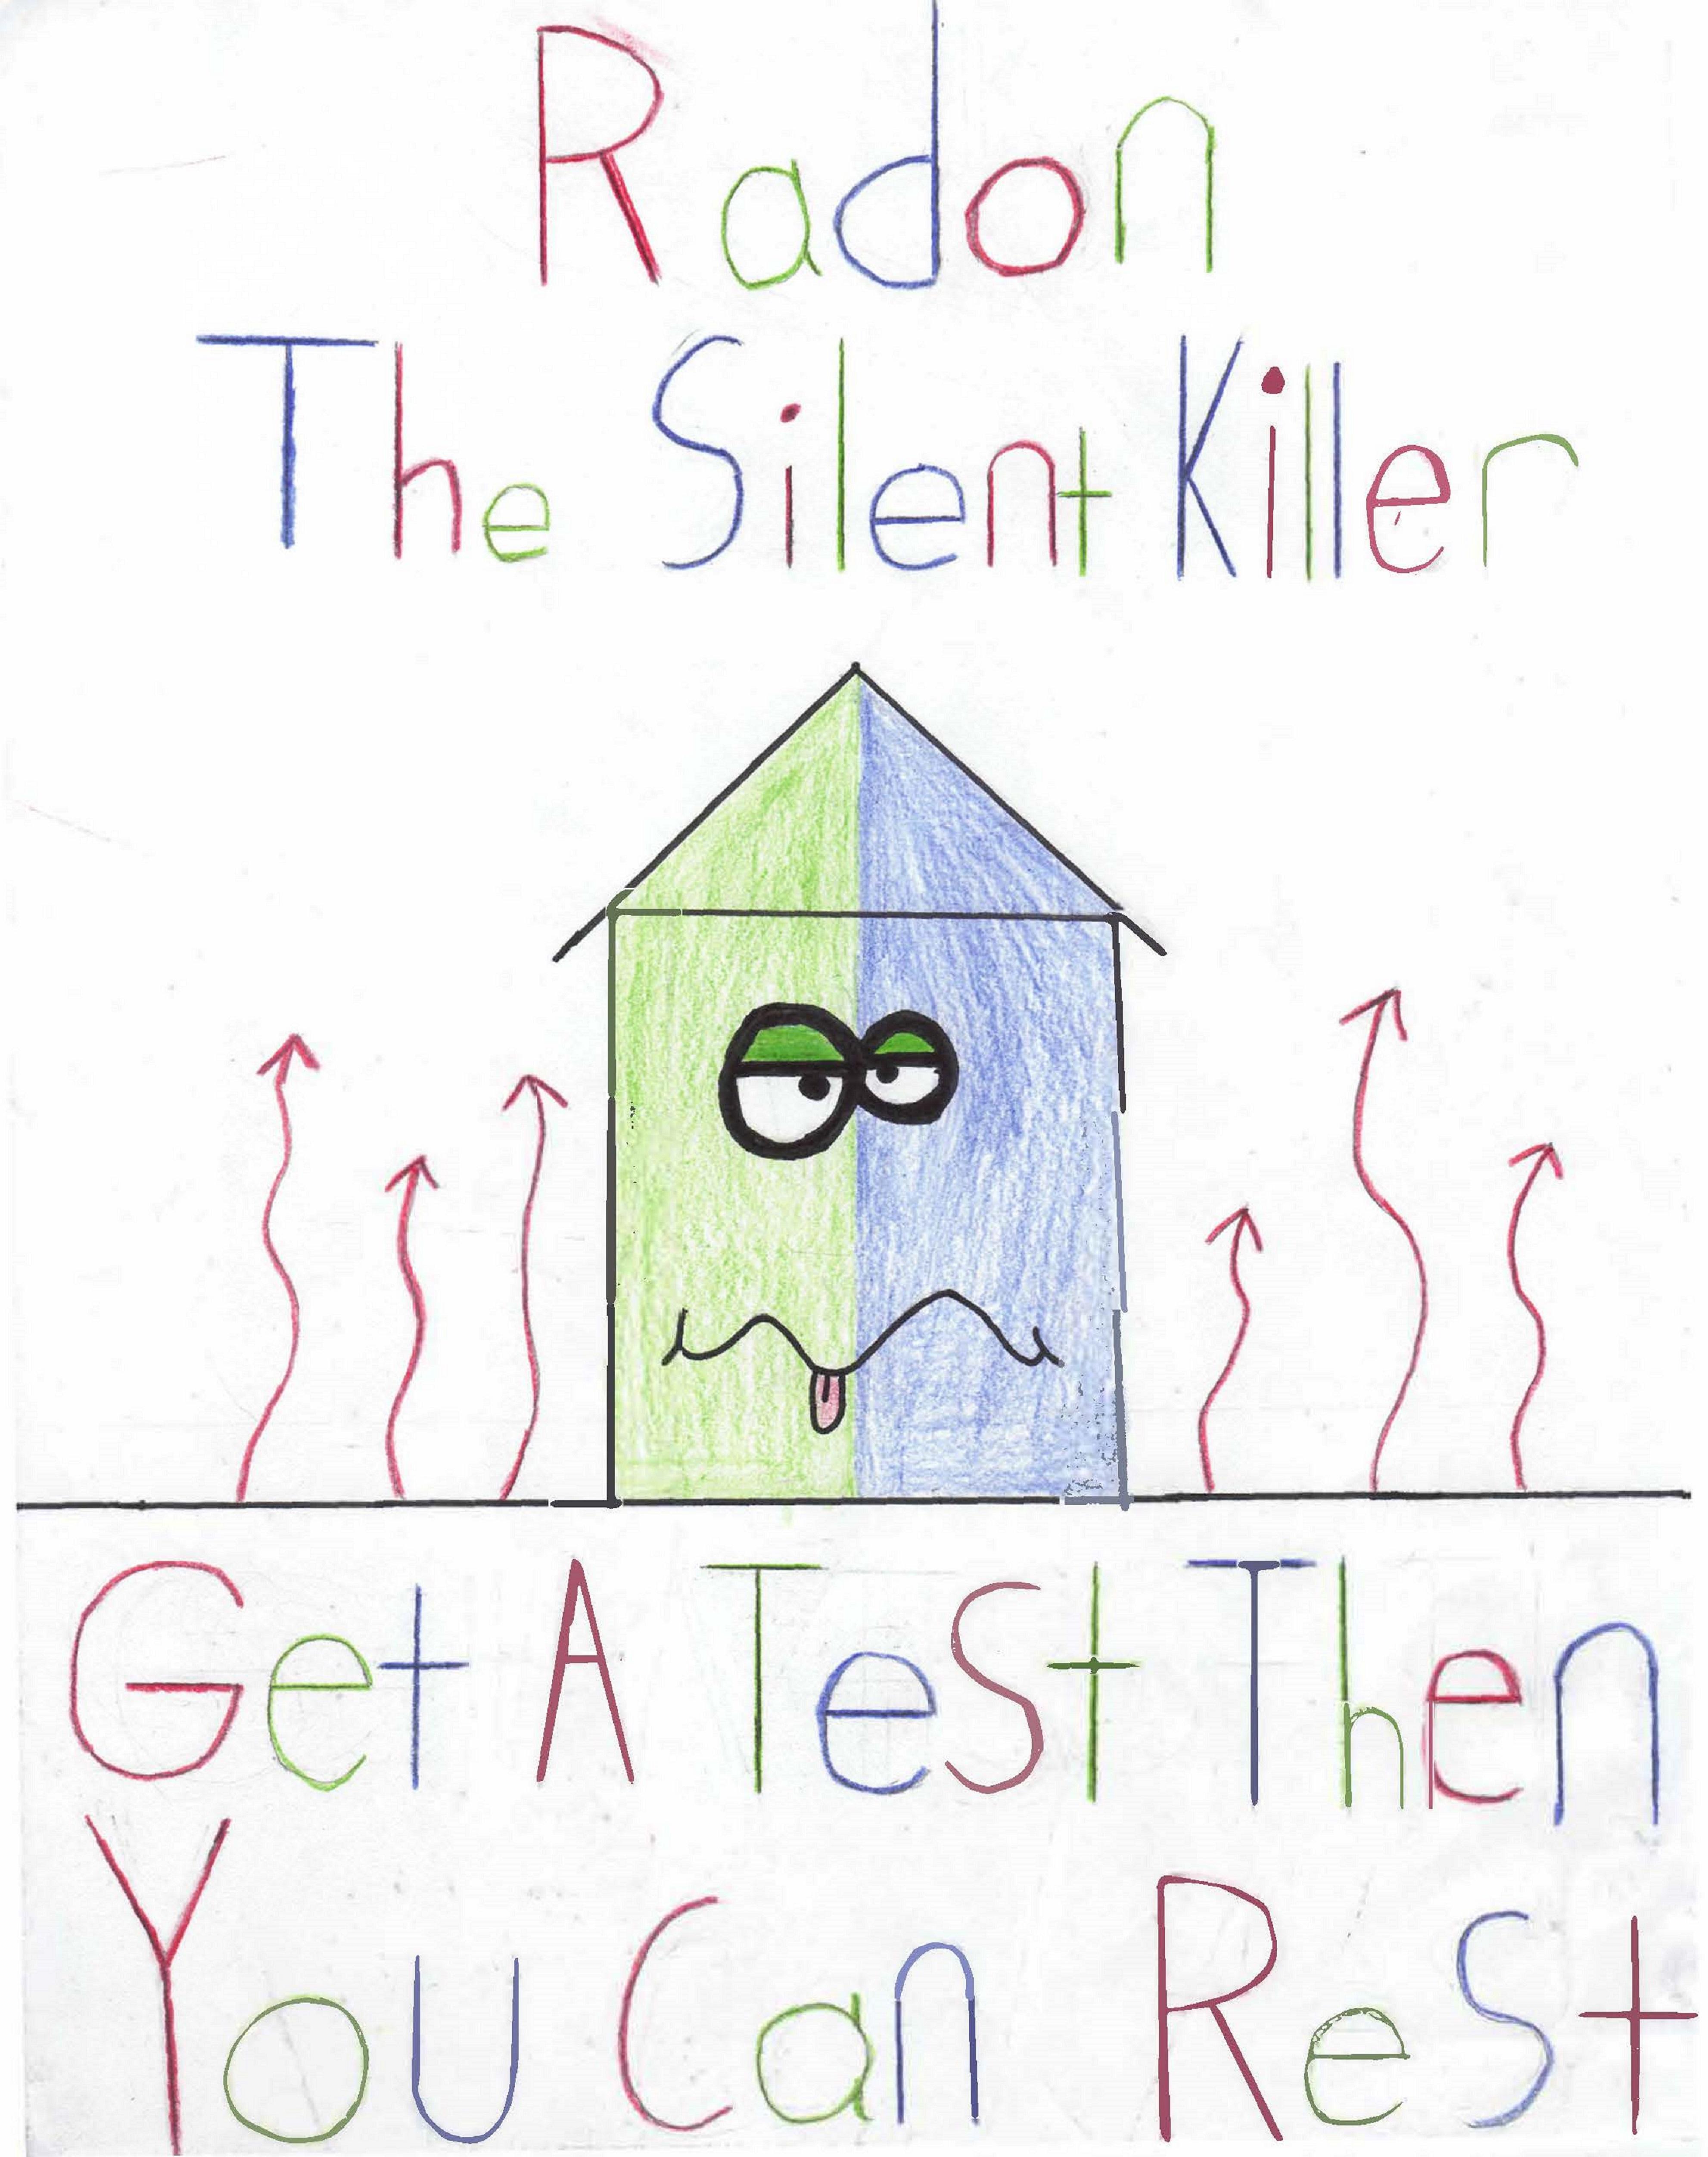 Radon the silent killer. Get a test then you can rest. With a drawing of a house with a sick looking face.